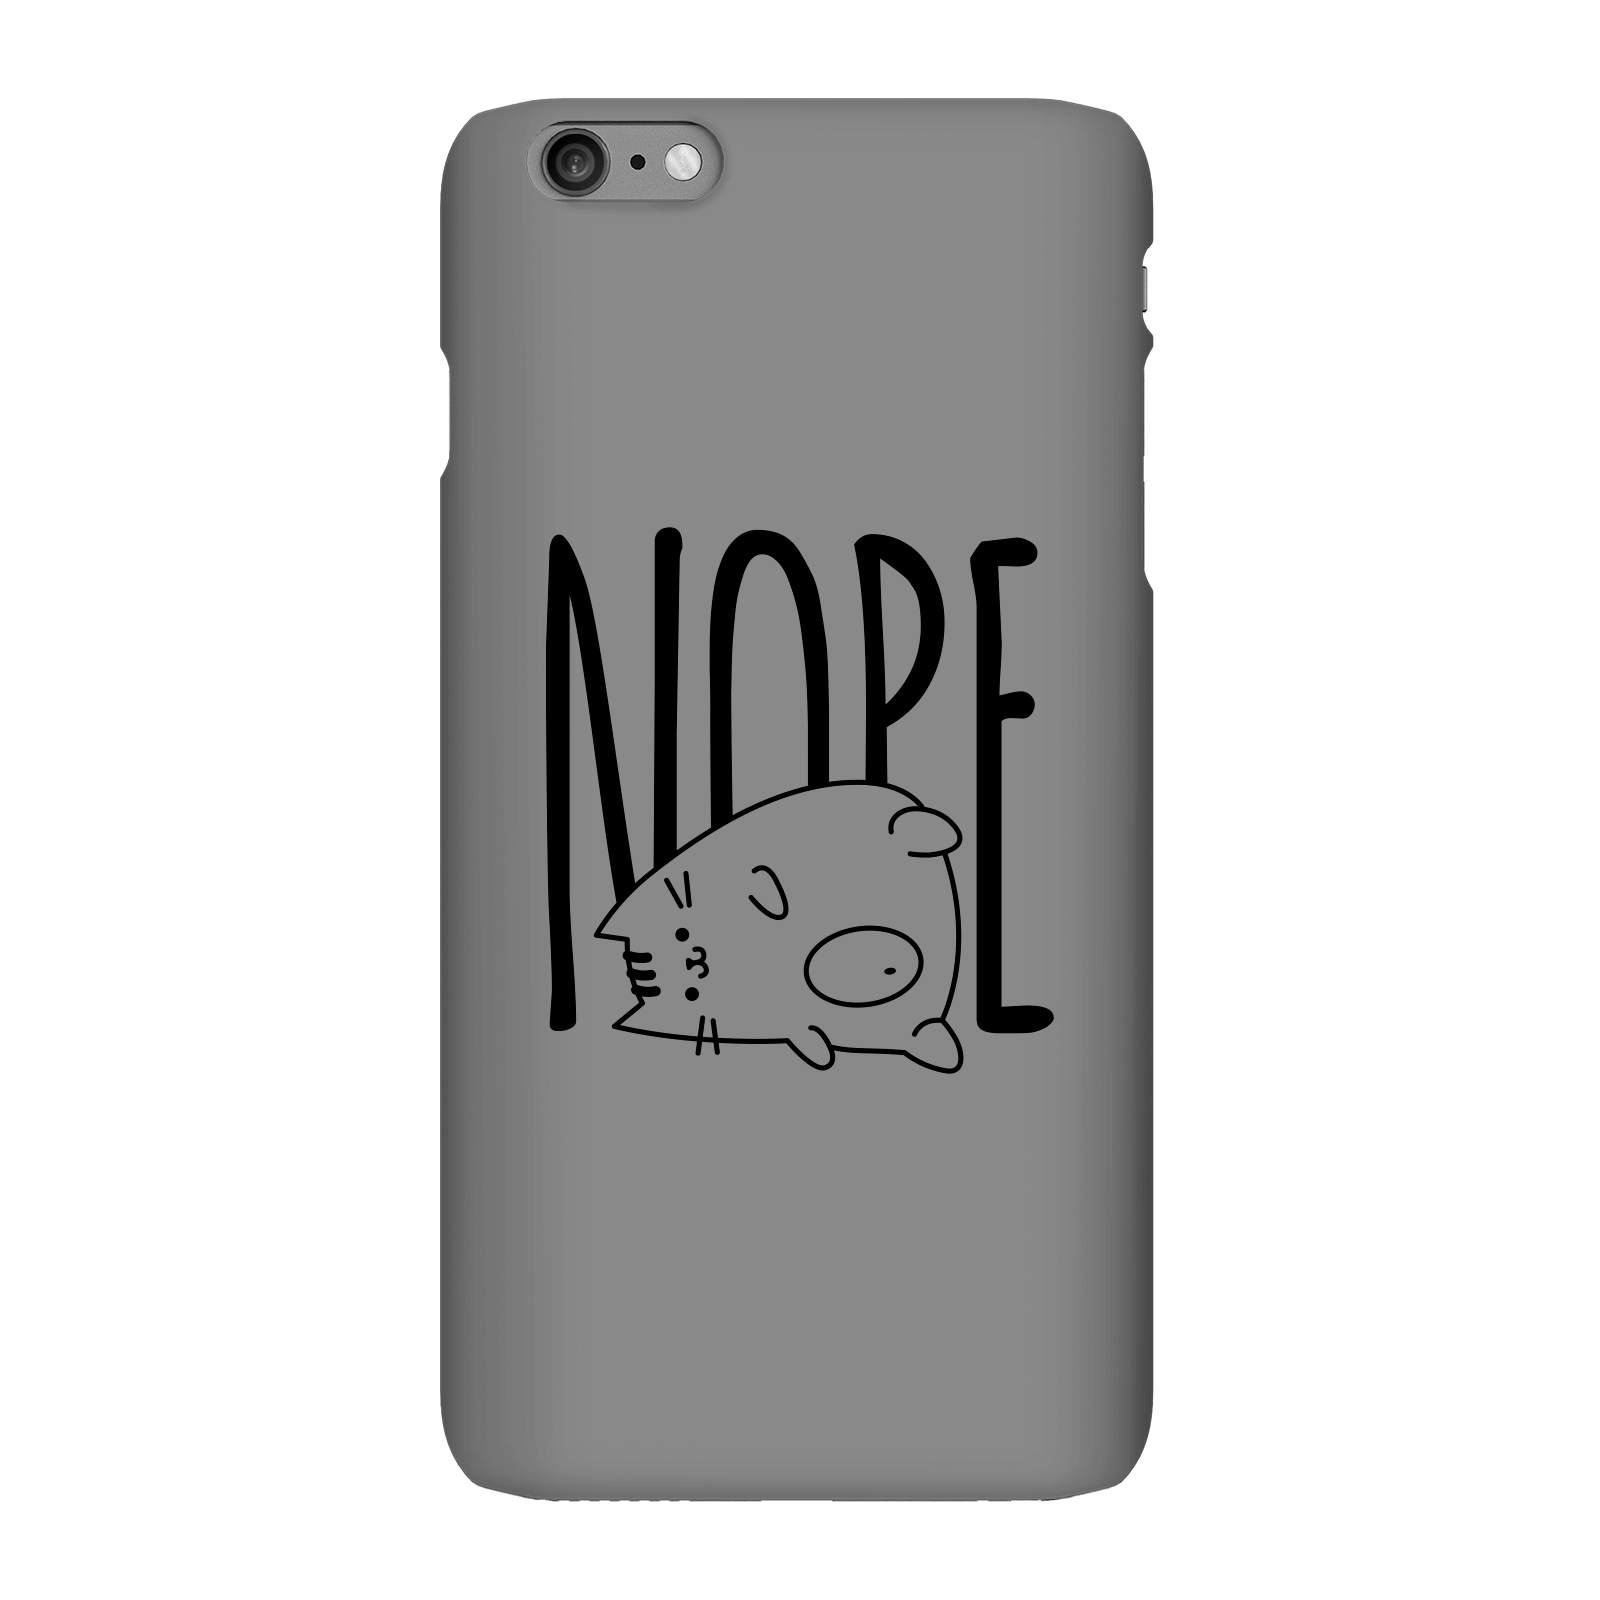 Nope Phone Case for iPhone and Android - iPhone 6 Plus - Snap Case - Gloss